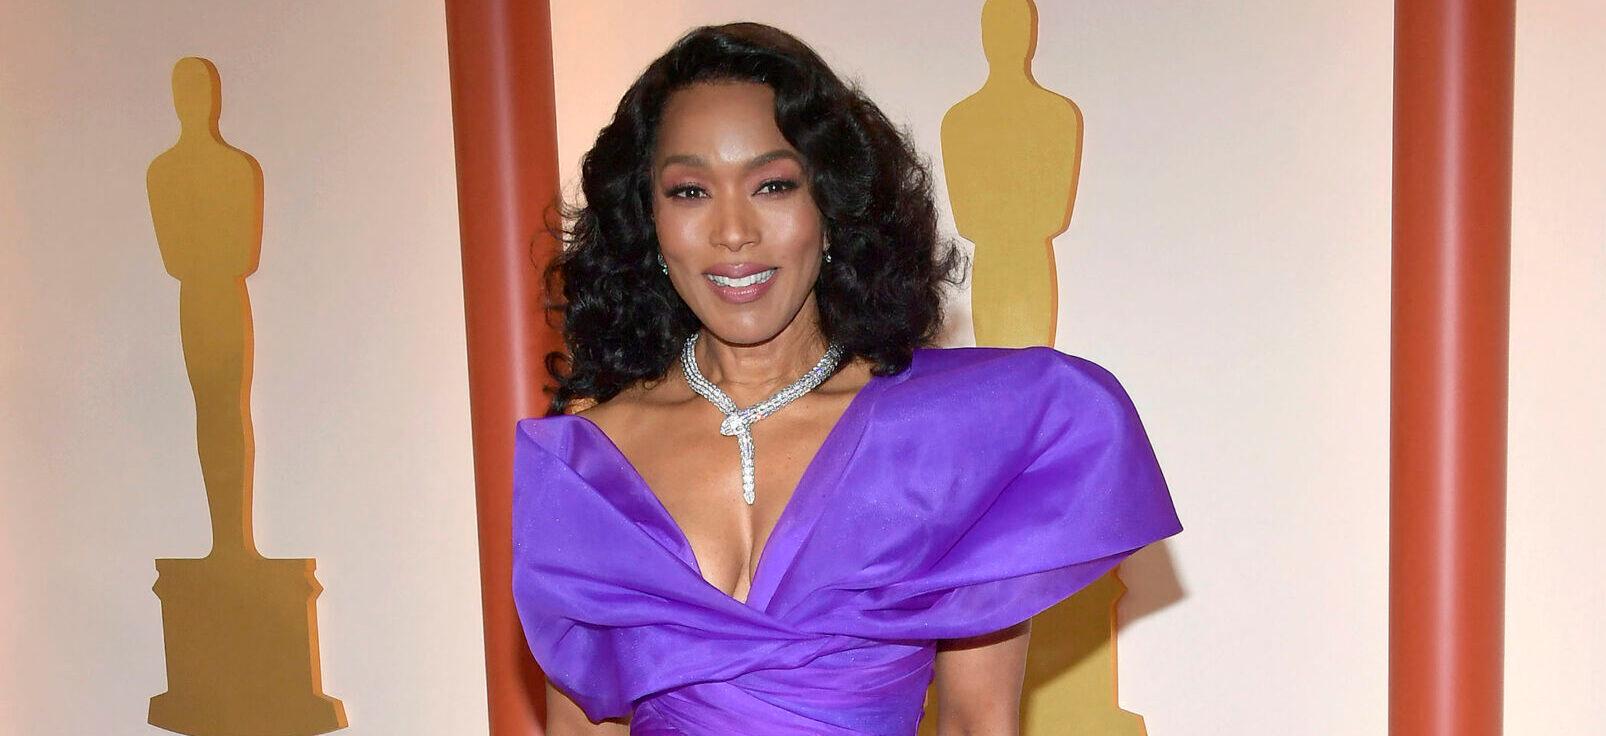 Angela Bassett Announced As A Recipient Of An Honorary Oscar Award After Two Previous Nominations